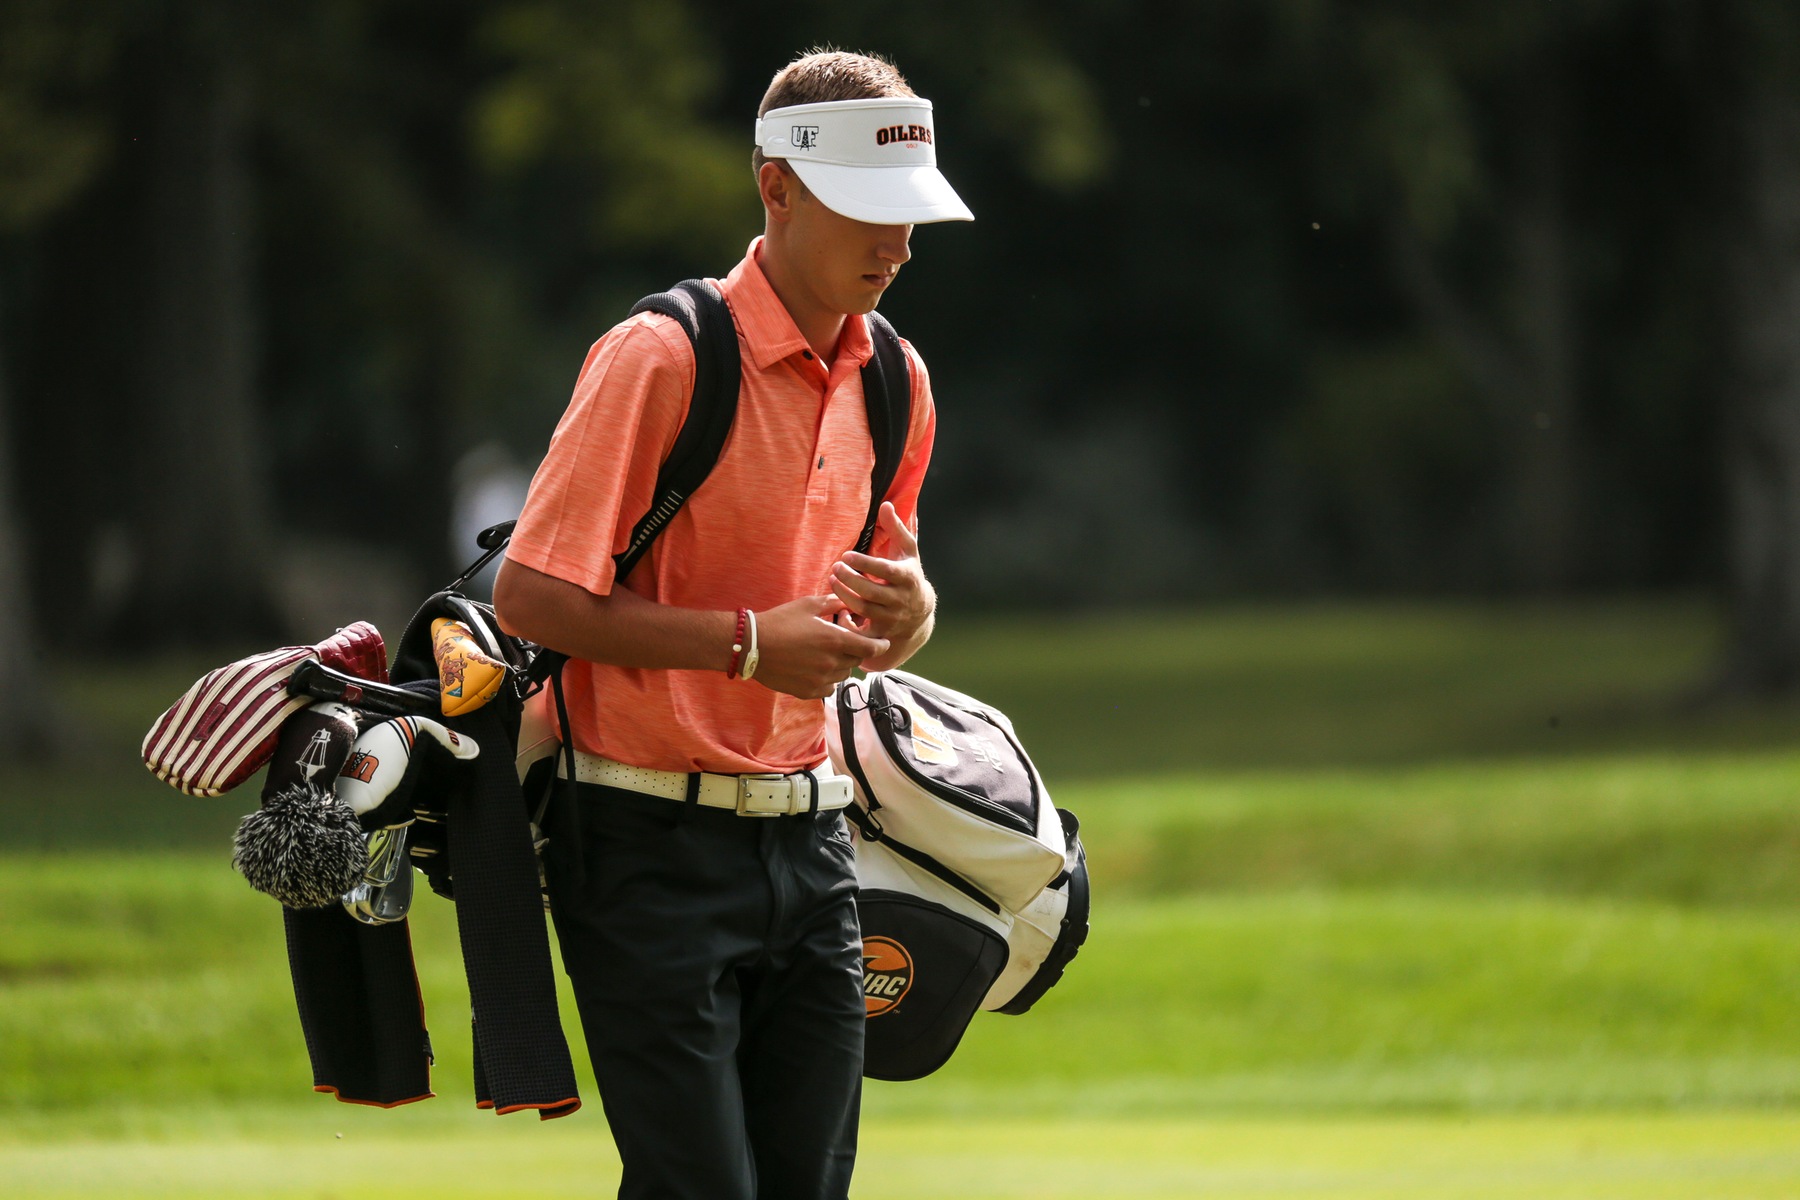 Oilers Golf in Top 4 After First Round